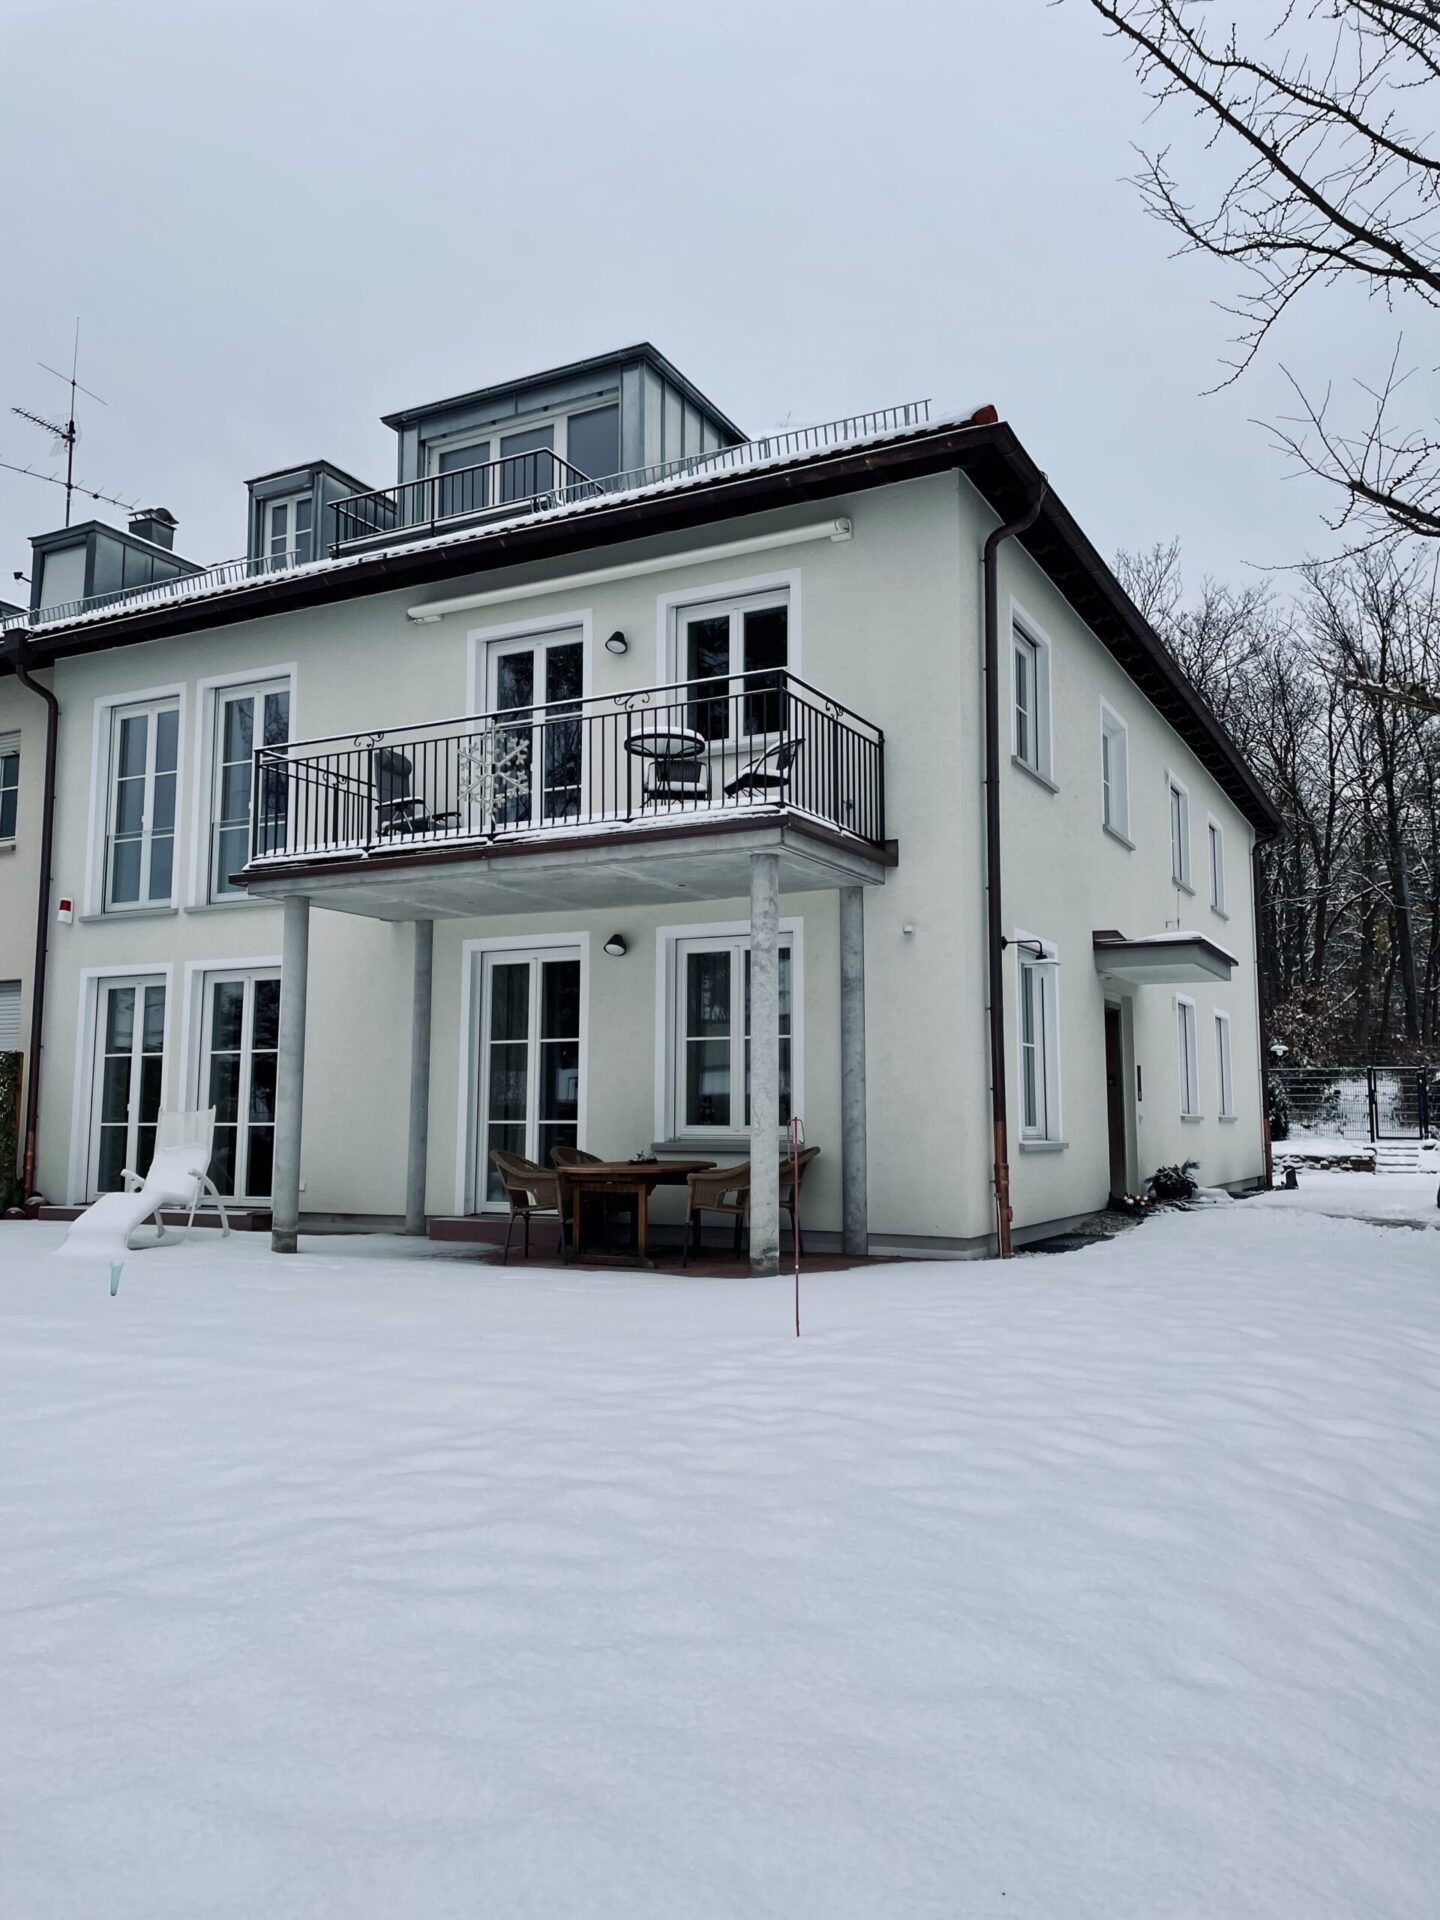 house in the winter